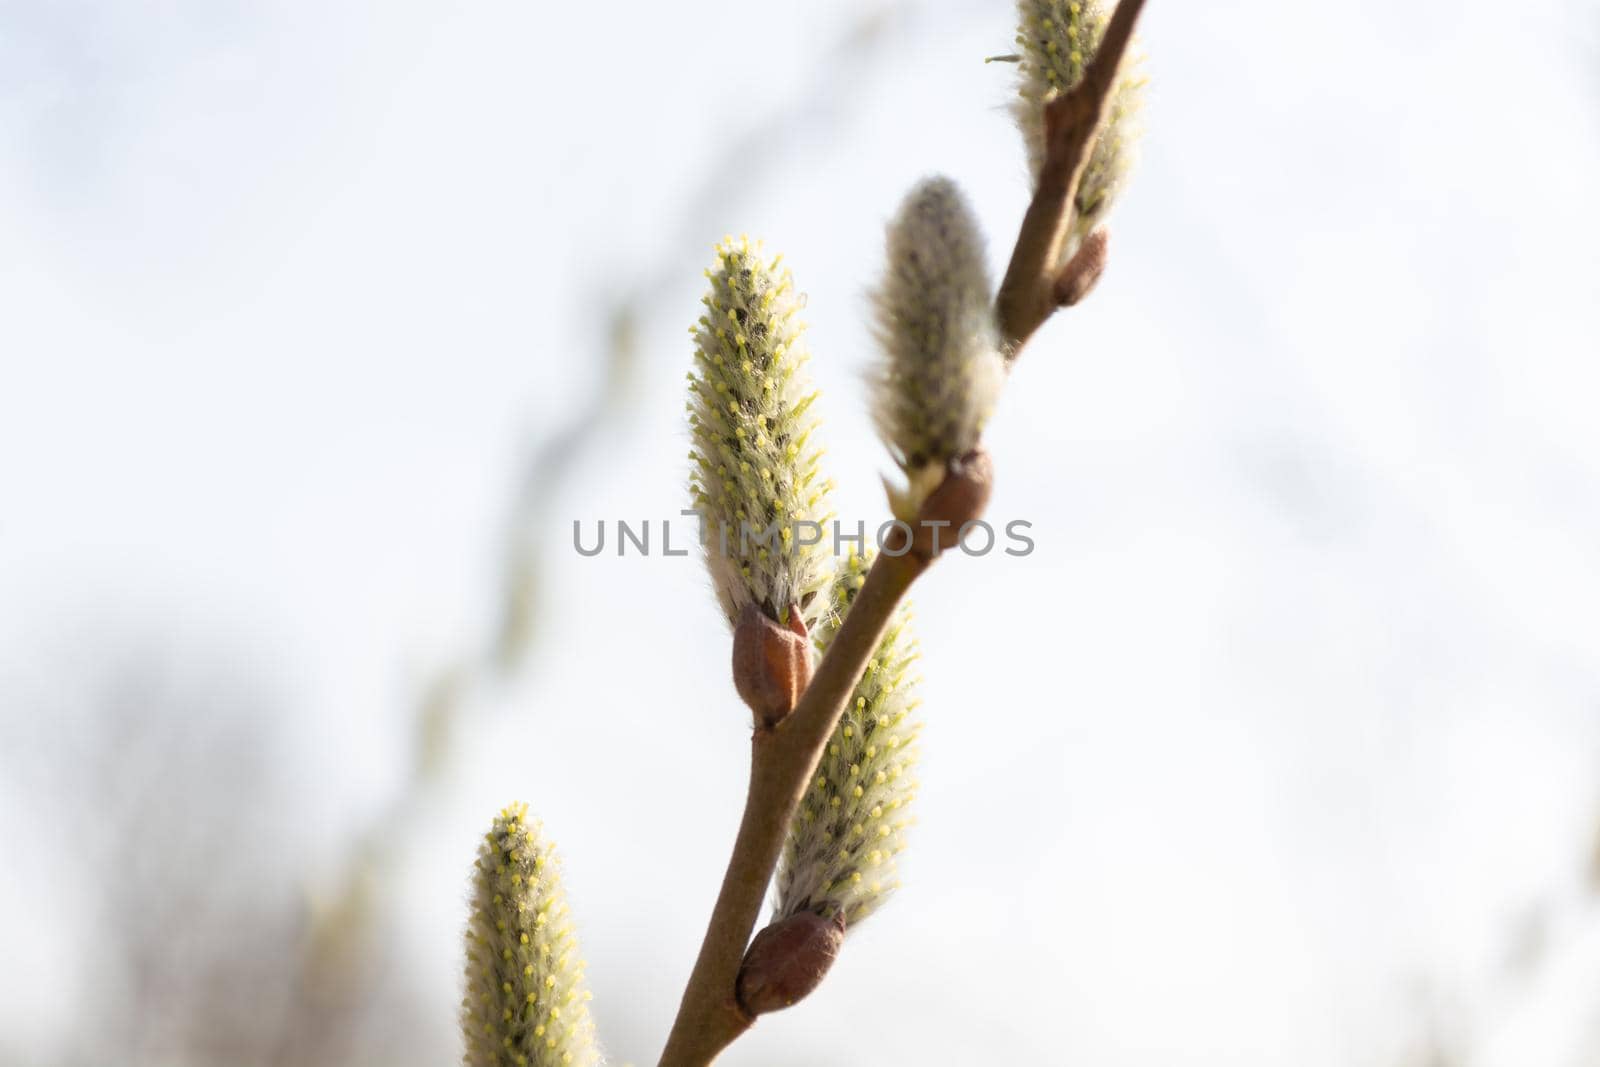 Willow branch with flowers, Easter tree against the background of the spring clear sky.